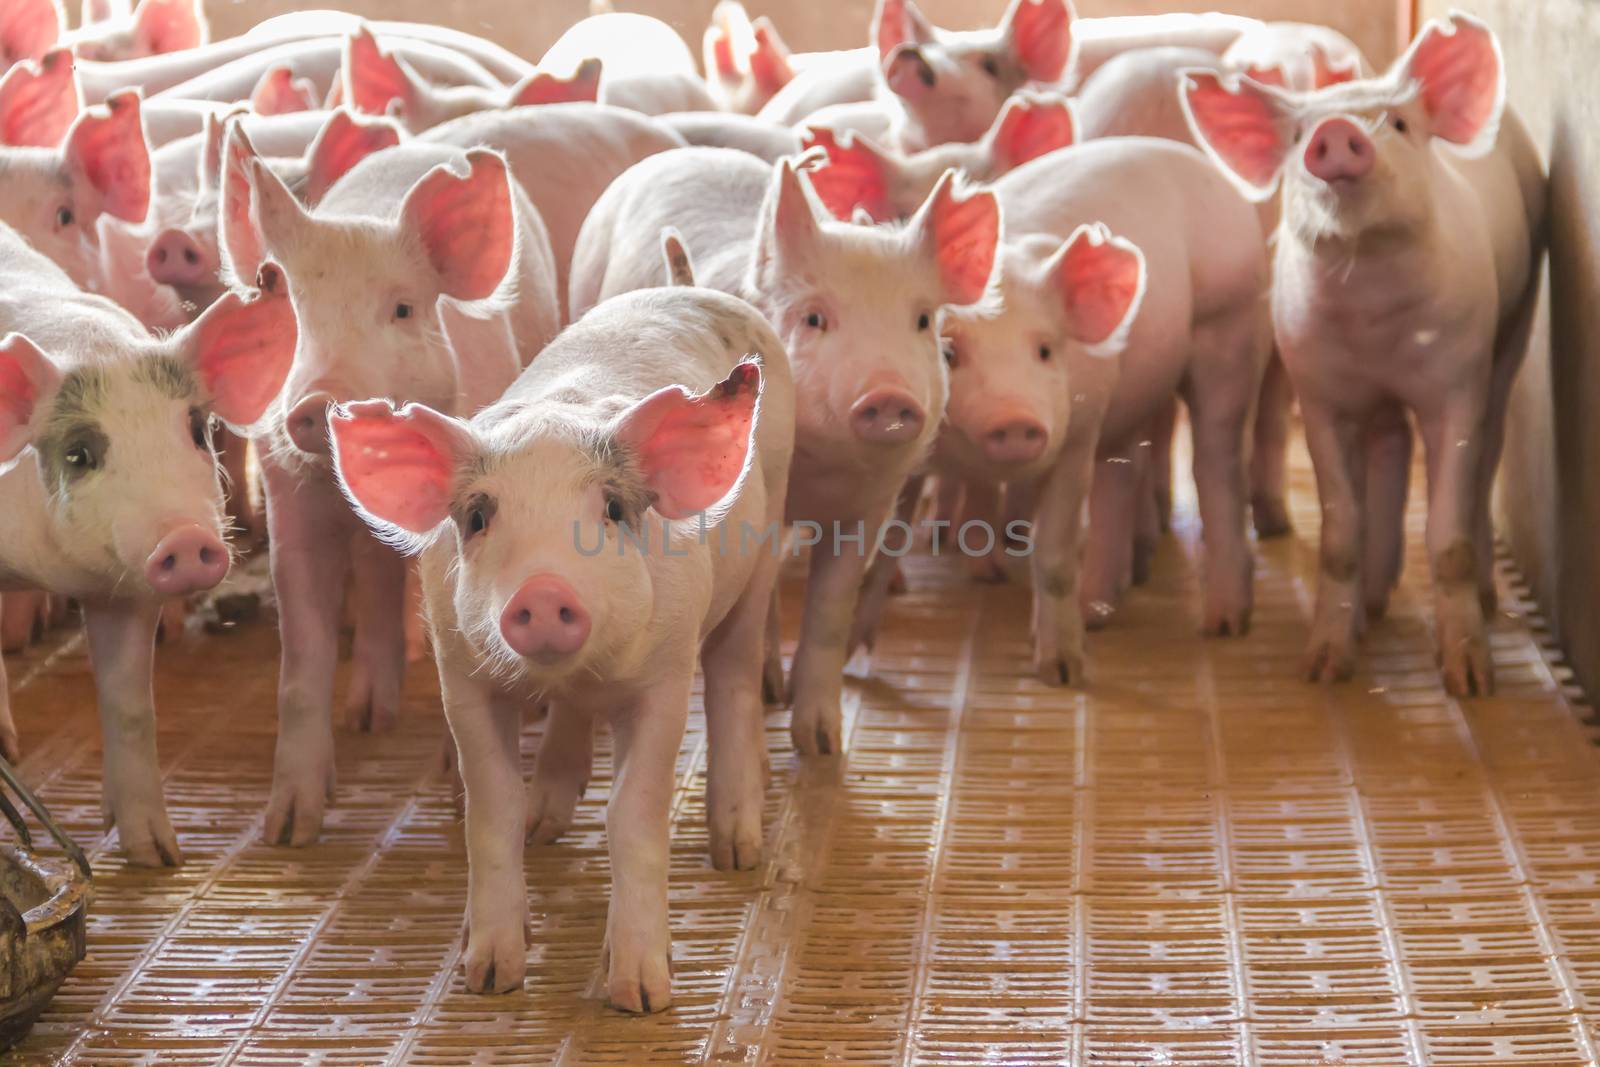 industrial pigs hatchery to consume its meat by GabrielaBertolini